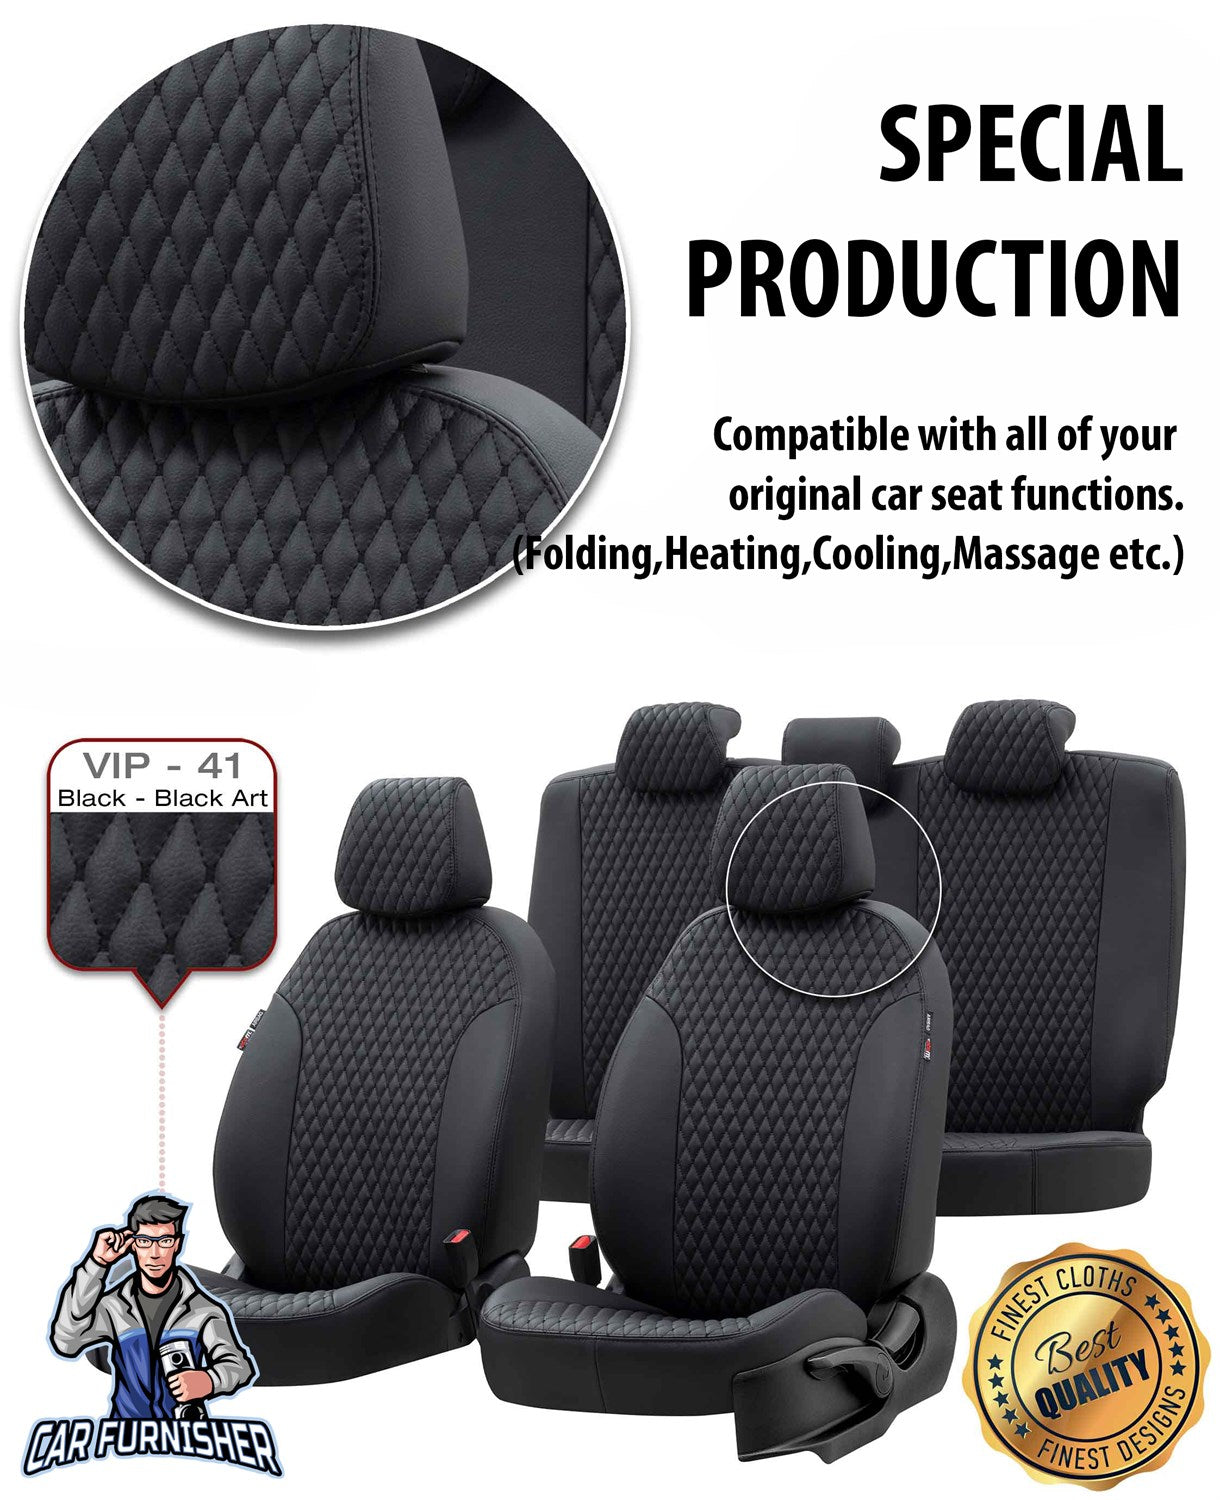 Honda HRV Seat Covers Amsterdam Leather Design Smoked Black Leather